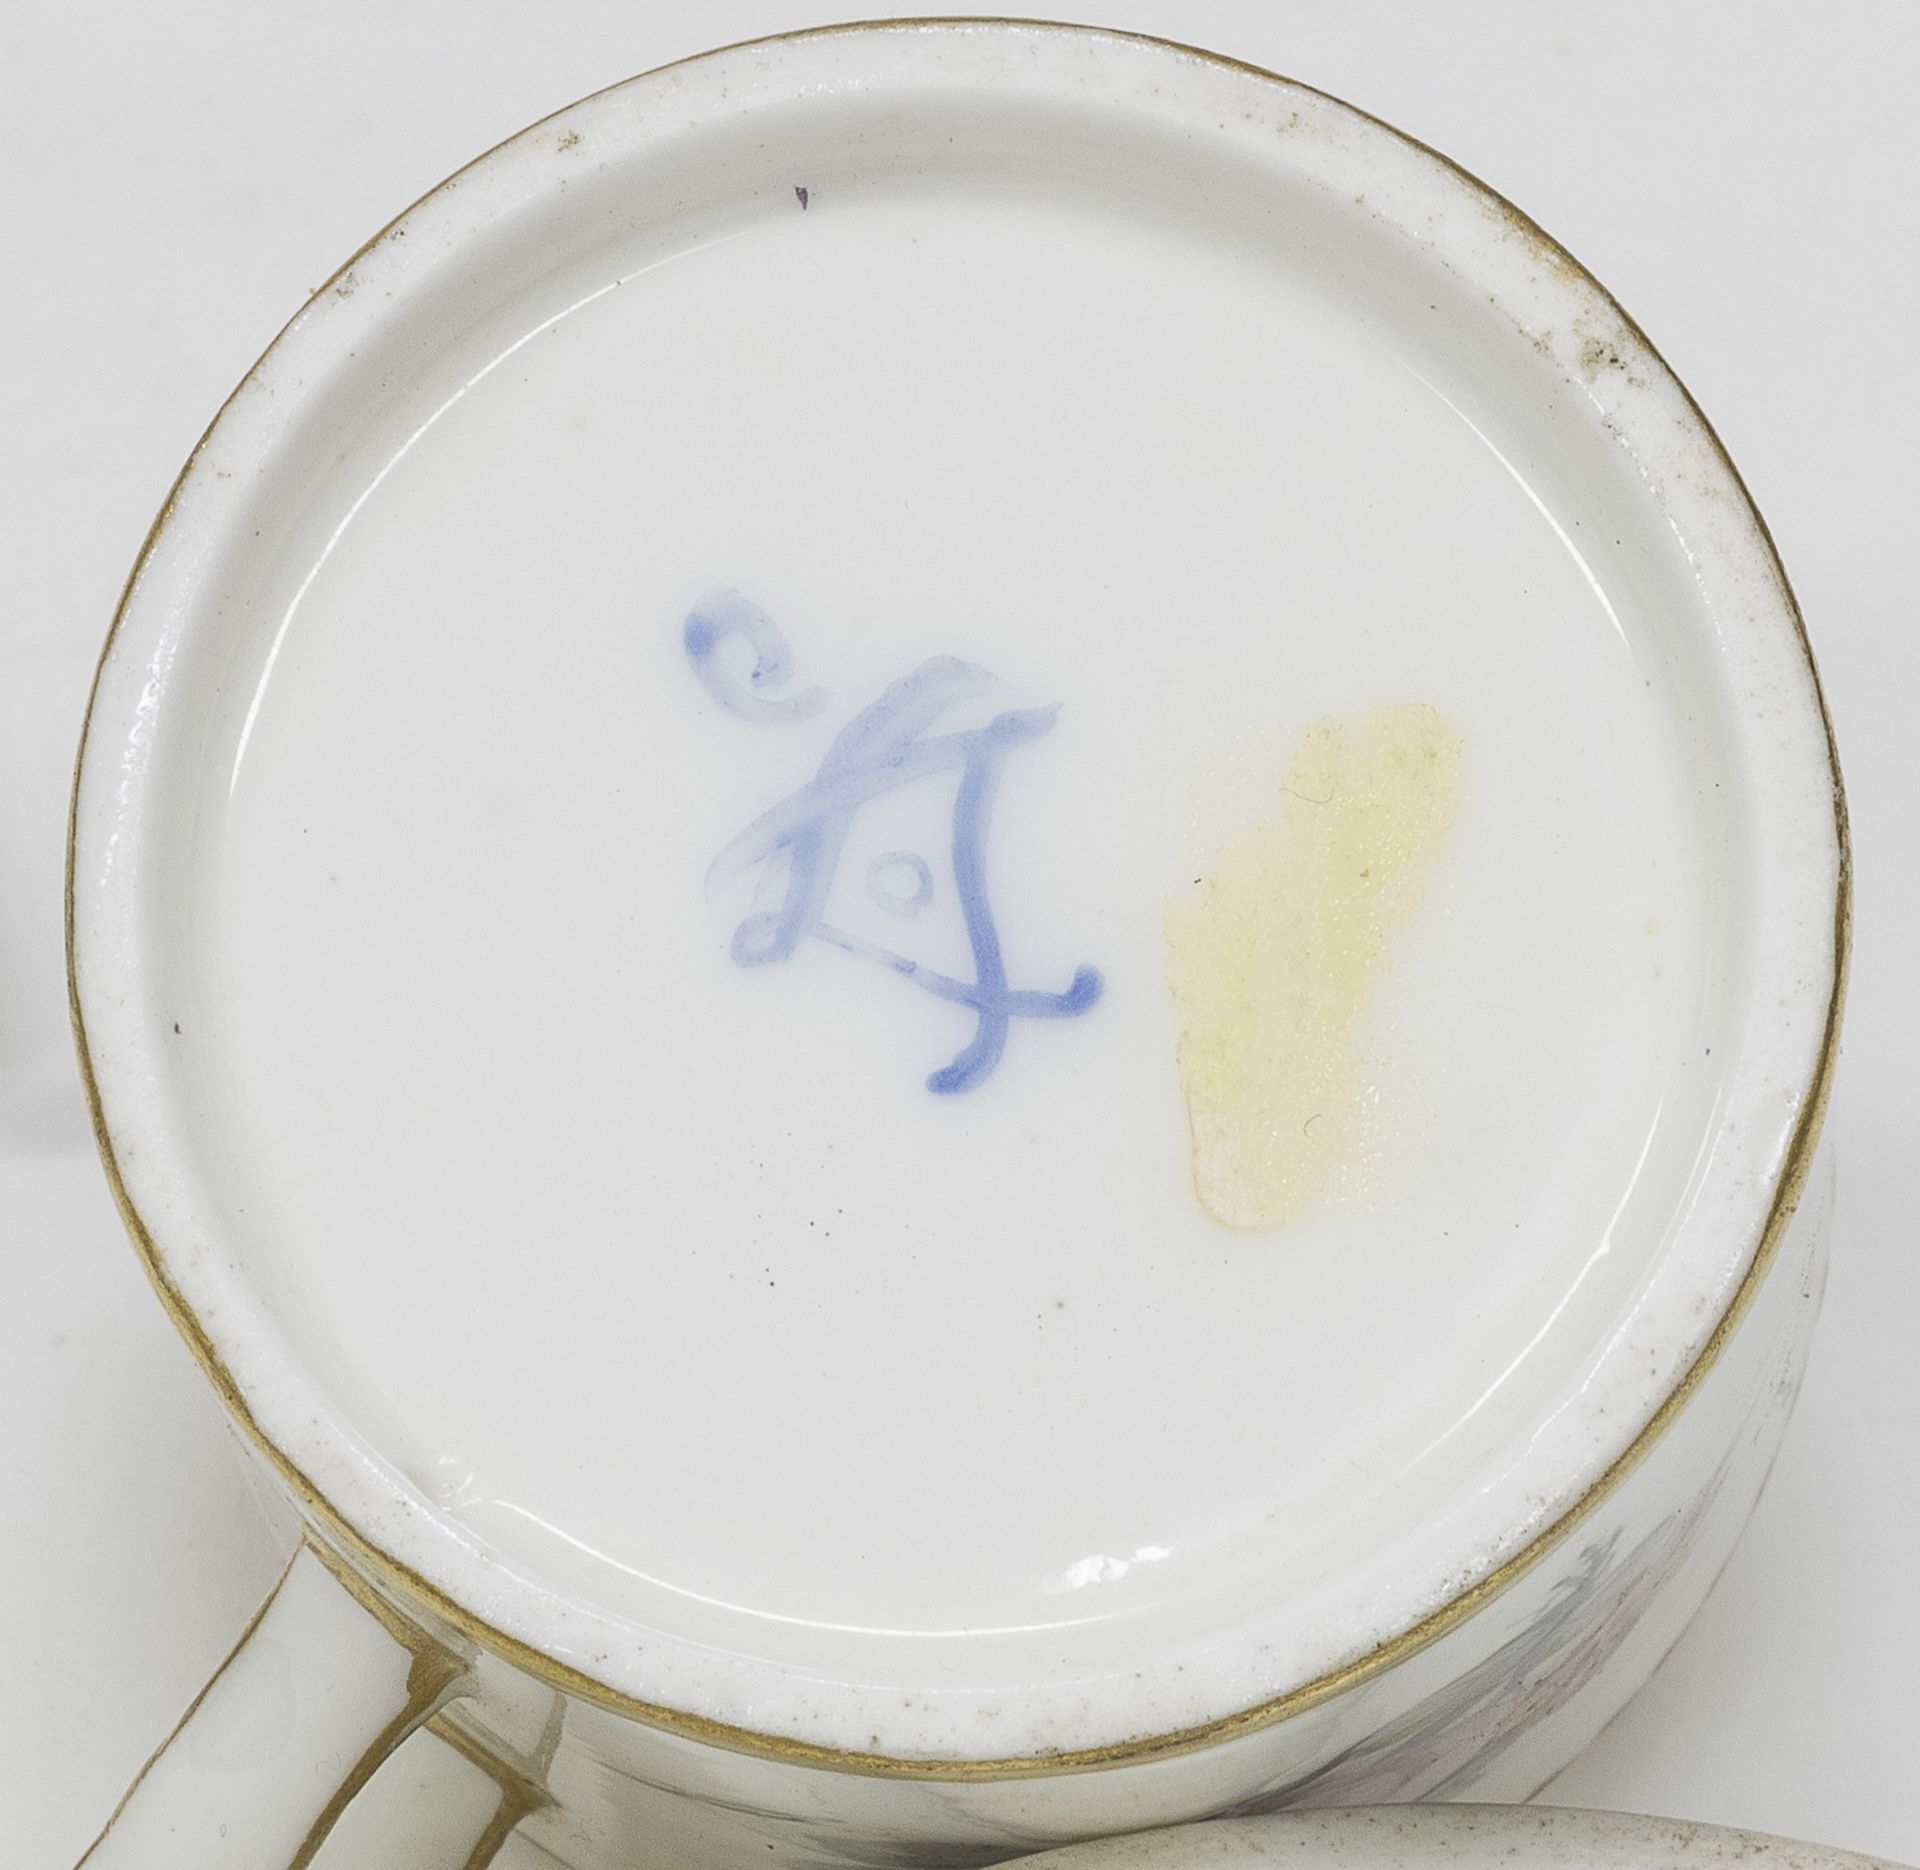 PORCELAIN CUP AND SAUCER SEVRES END OF THE 18TH CENTURY - Image 2 of 2